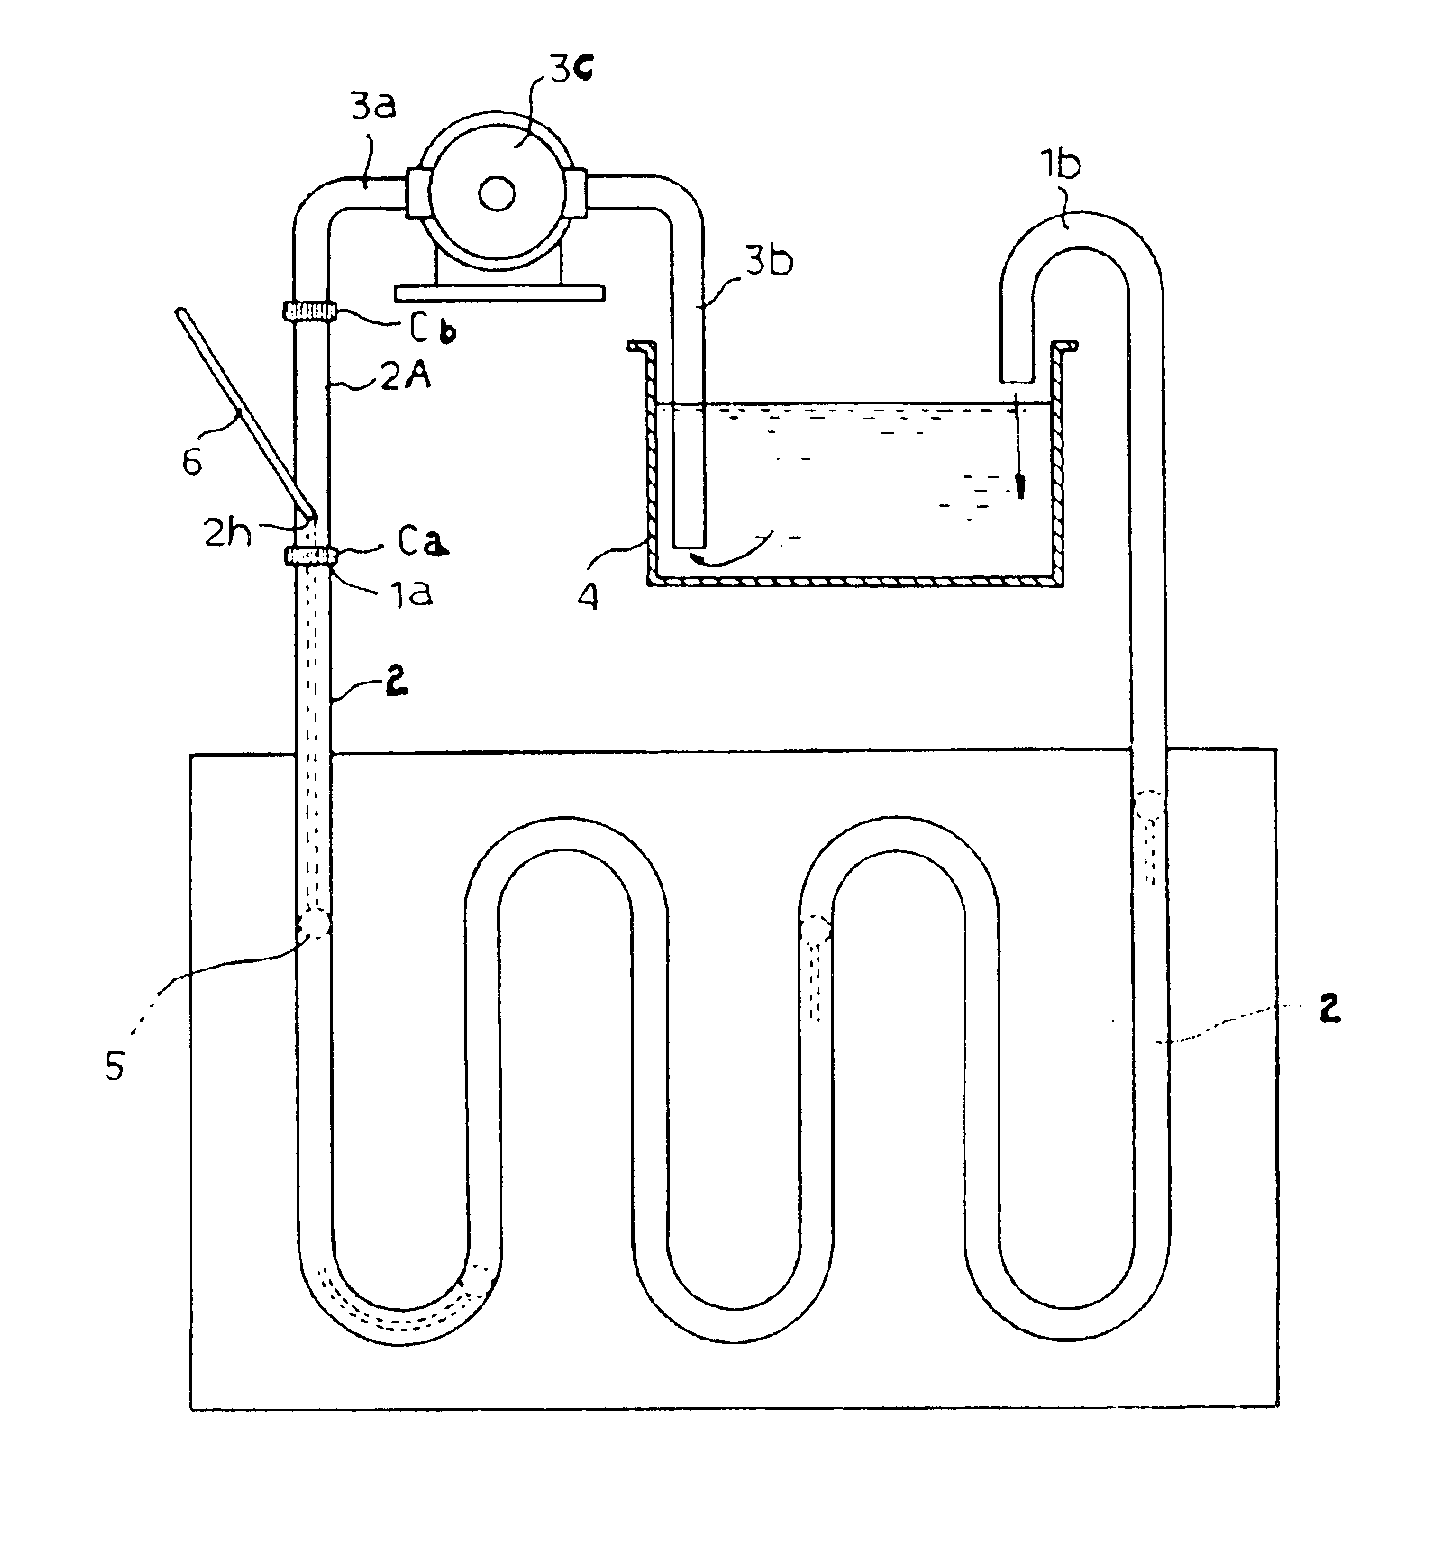 Method and device of inserting a coated electric heating wire into a hot water tube and a sealing apparatus for the open end(s) thereof